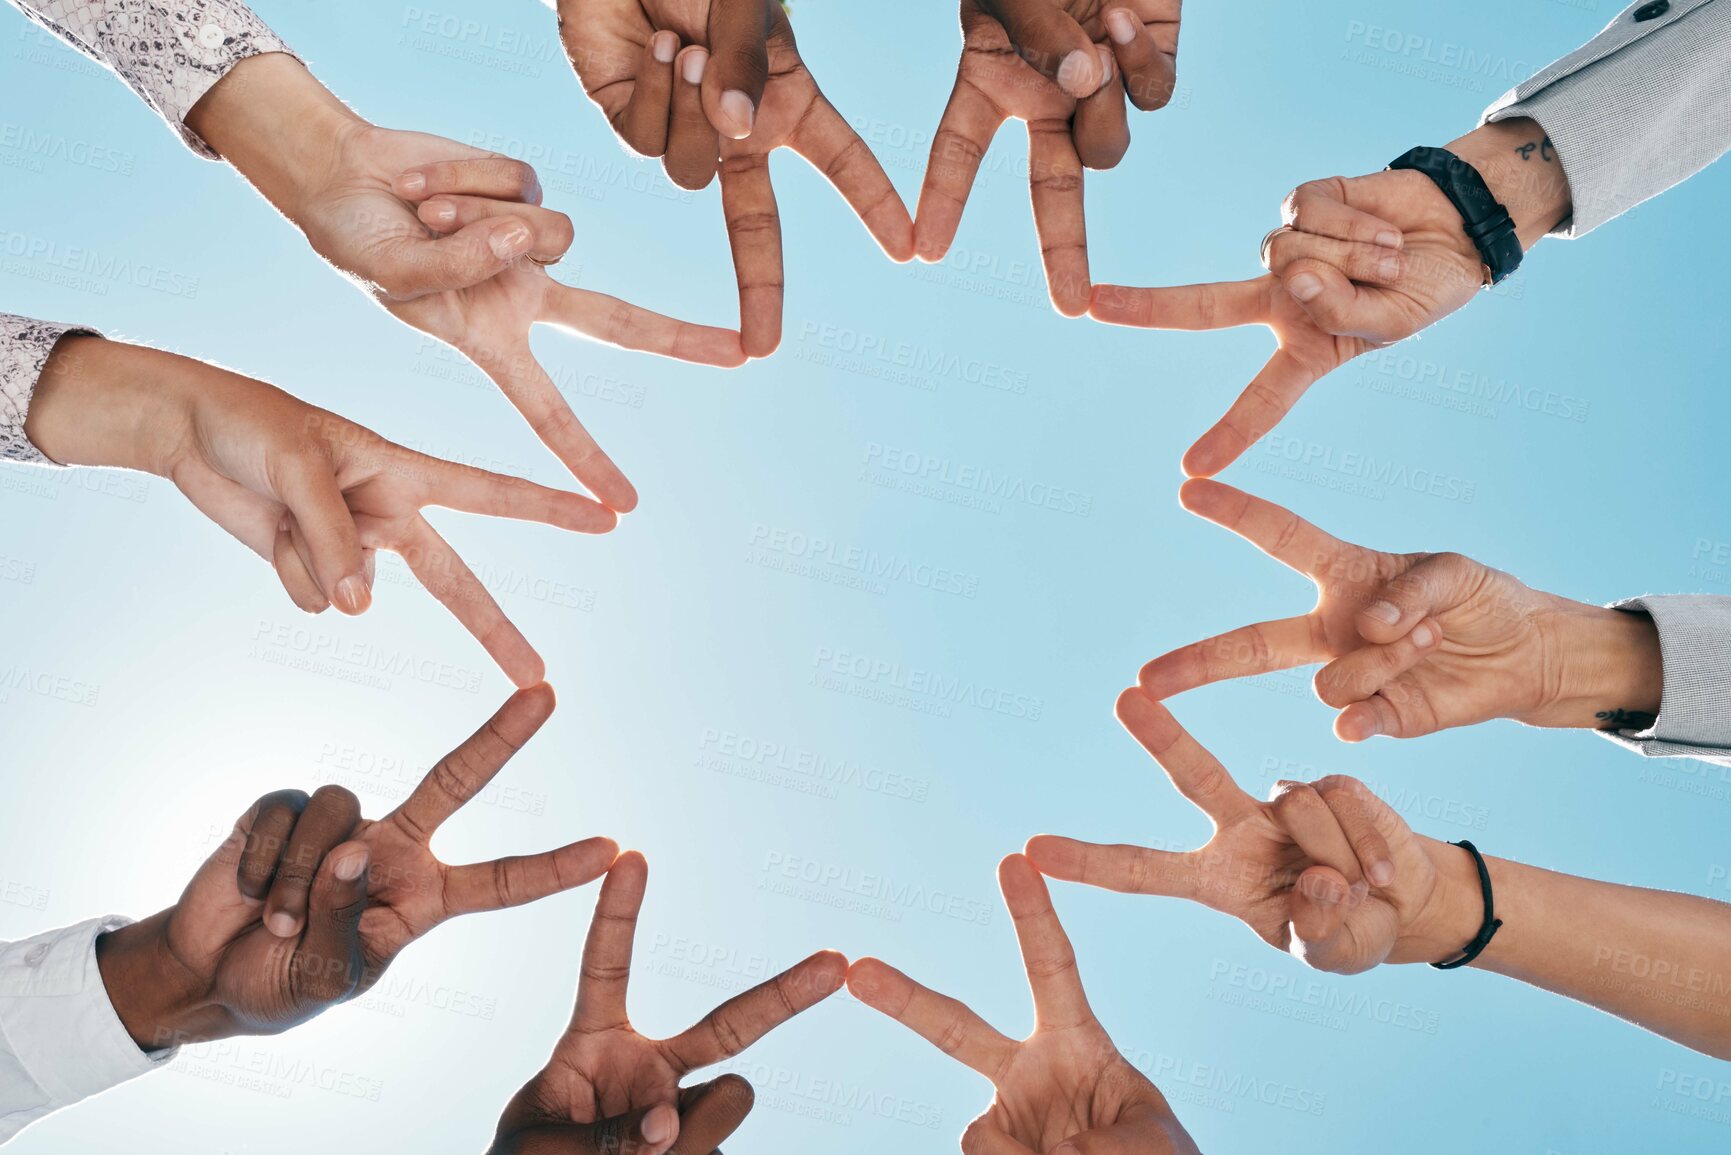 Buy stock photo Team building, blue sky or hands with peace sign for support, teamwork or partnership collaboration. Low angle, trust or fingers showing hope, faith or community group solidarity with mission goals